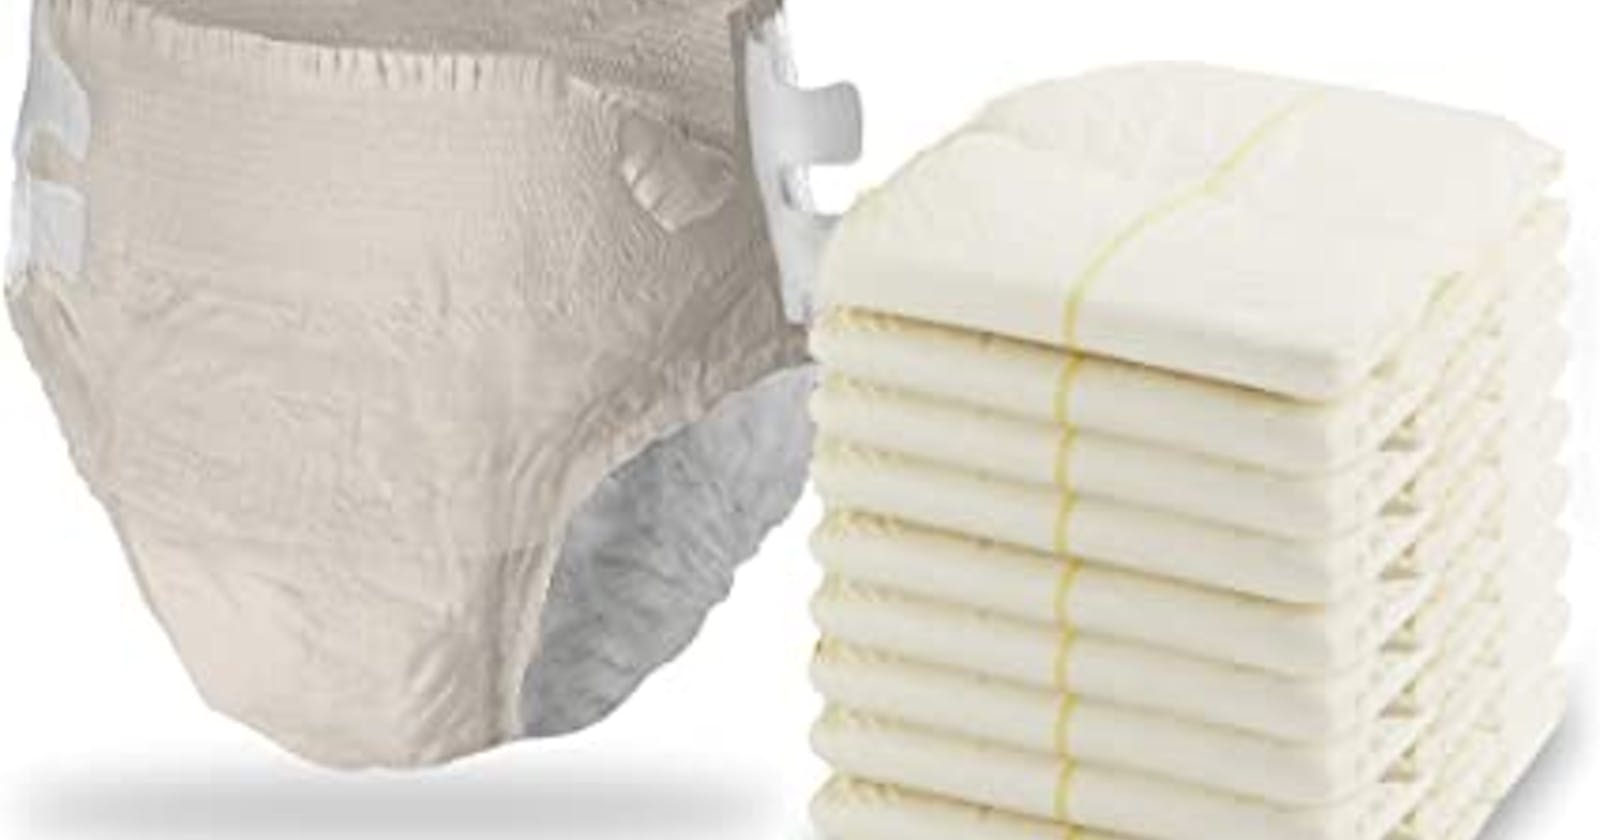 Japan Adult Diaper Market Size, Share, Trends, Growth and Future Scope 2027